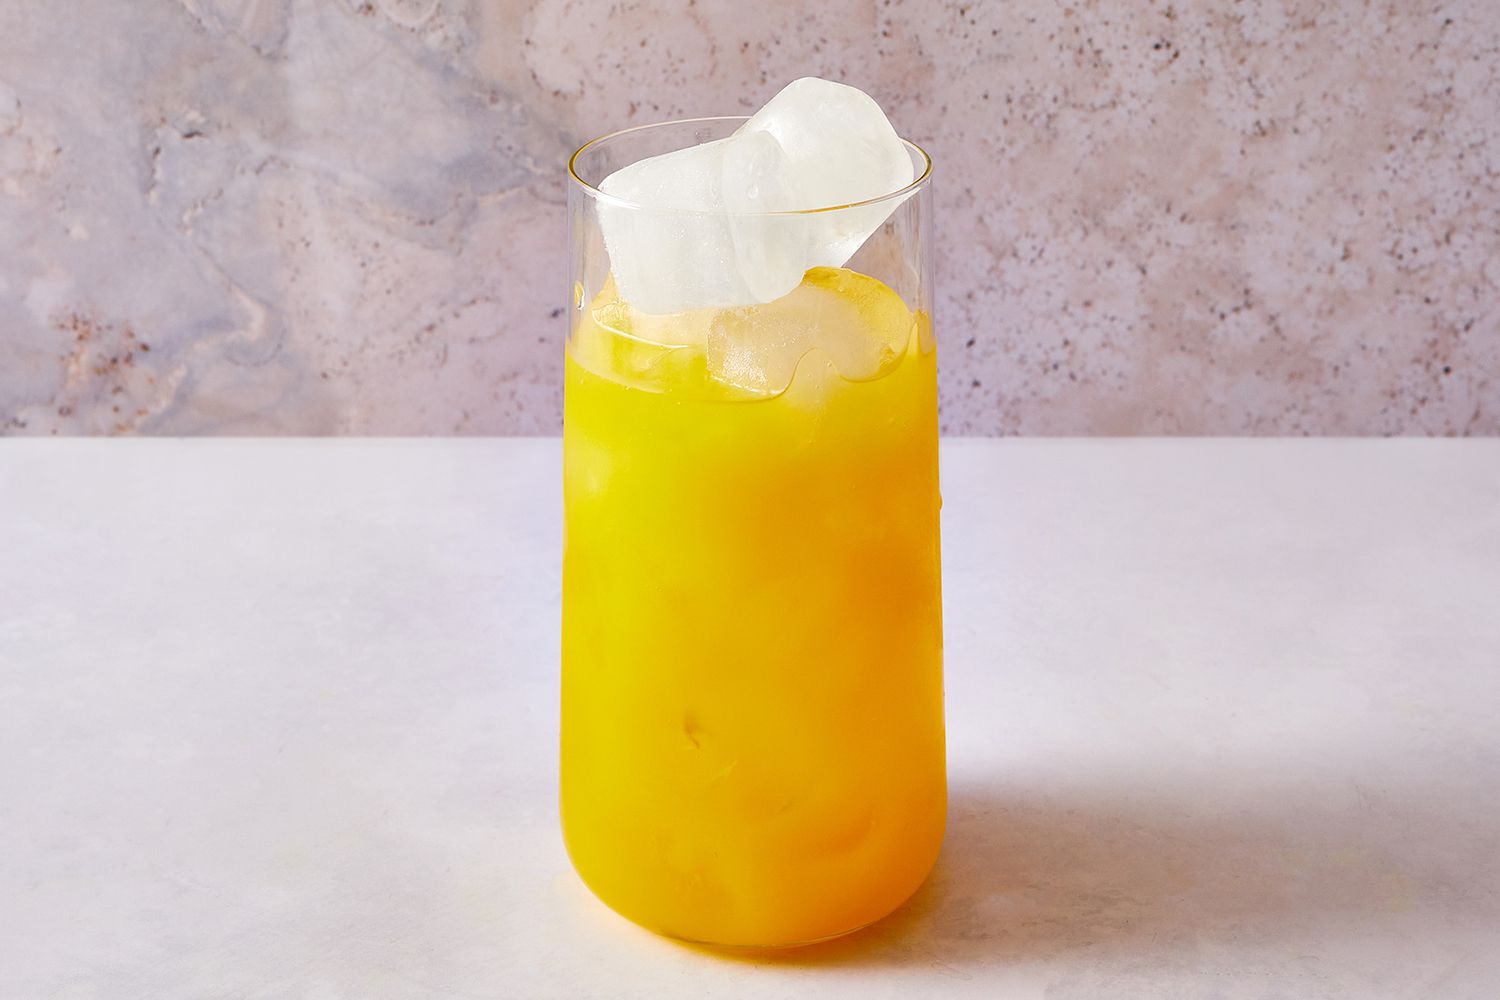 Tequila and orange juice over ice in a high ball glass